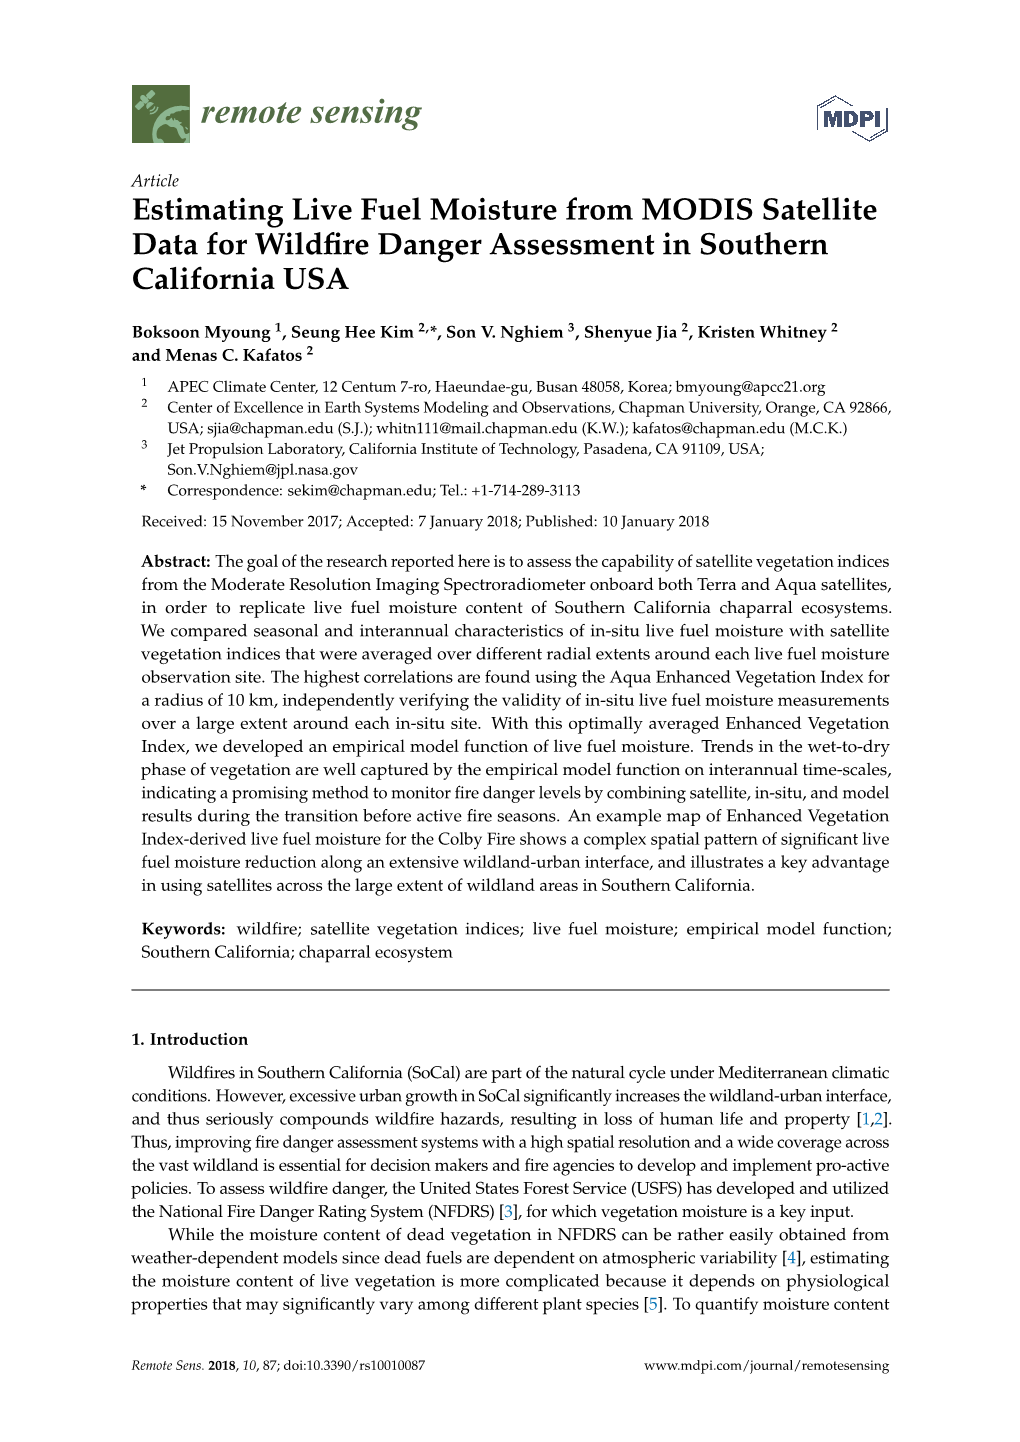 Estimating Live Fuel Moisture from MODIS Satellite Data for Wildfire Danger Assessment in Southern California